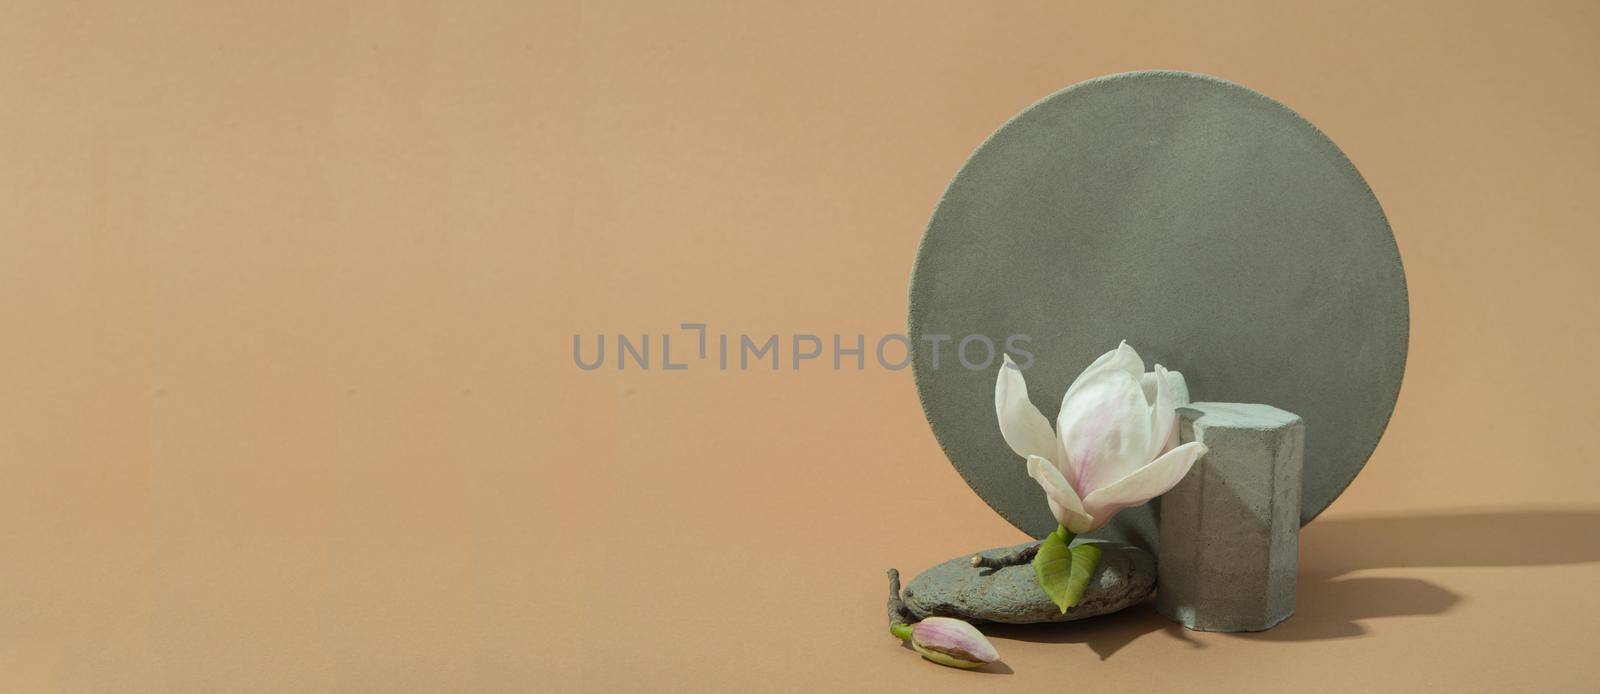 minimalist banner with concrete shapes and blooming flower on pastel background. High quality photo